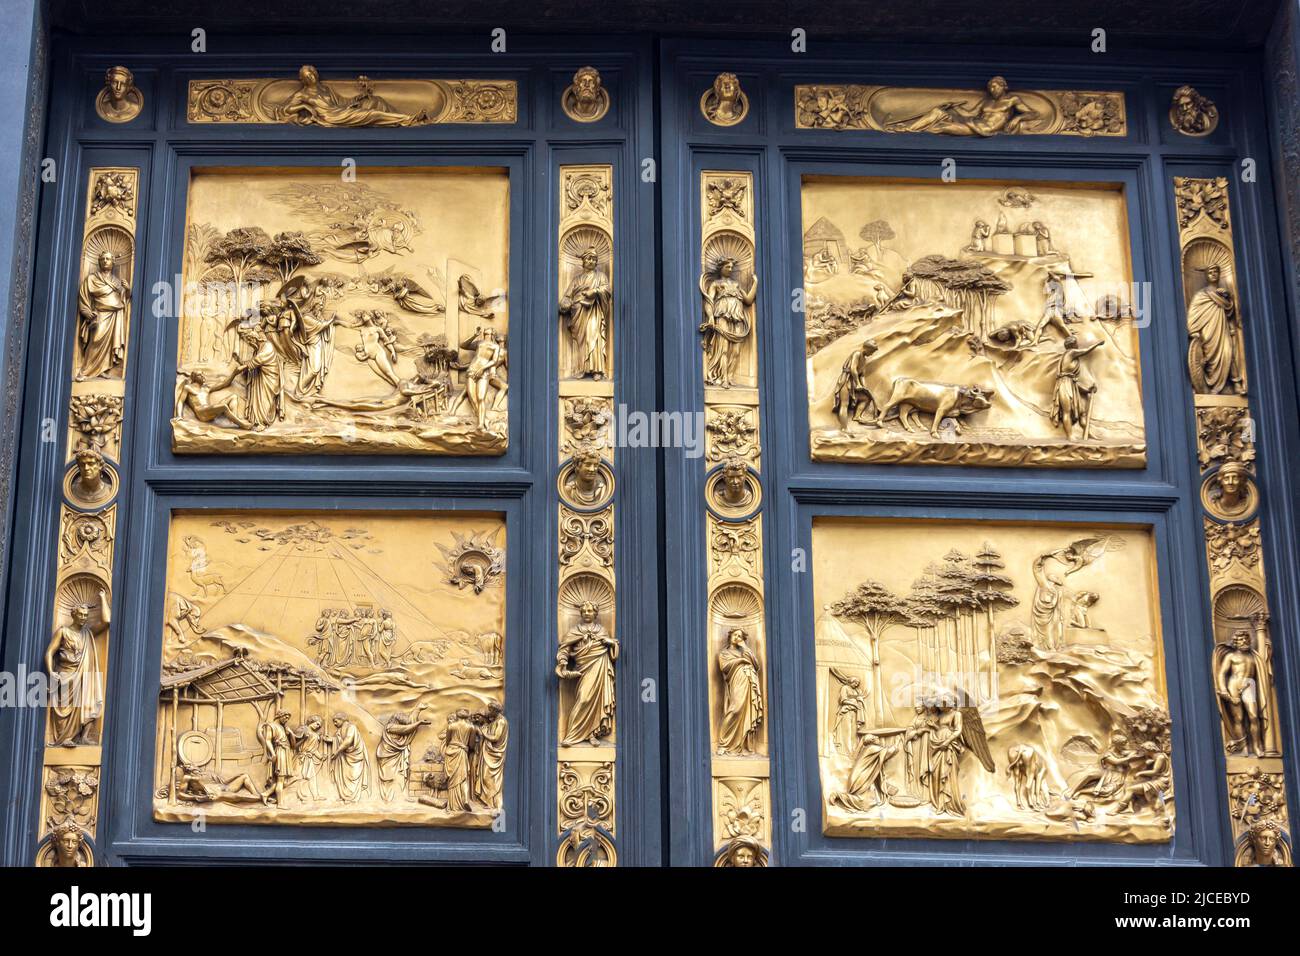 'Gates of Paradise' on east entry of the Bapistry of Cattedrale di Santa Maria del Fiore (Duomo), Florence (Firenze), Tuscany Region, Italy Stock Photo